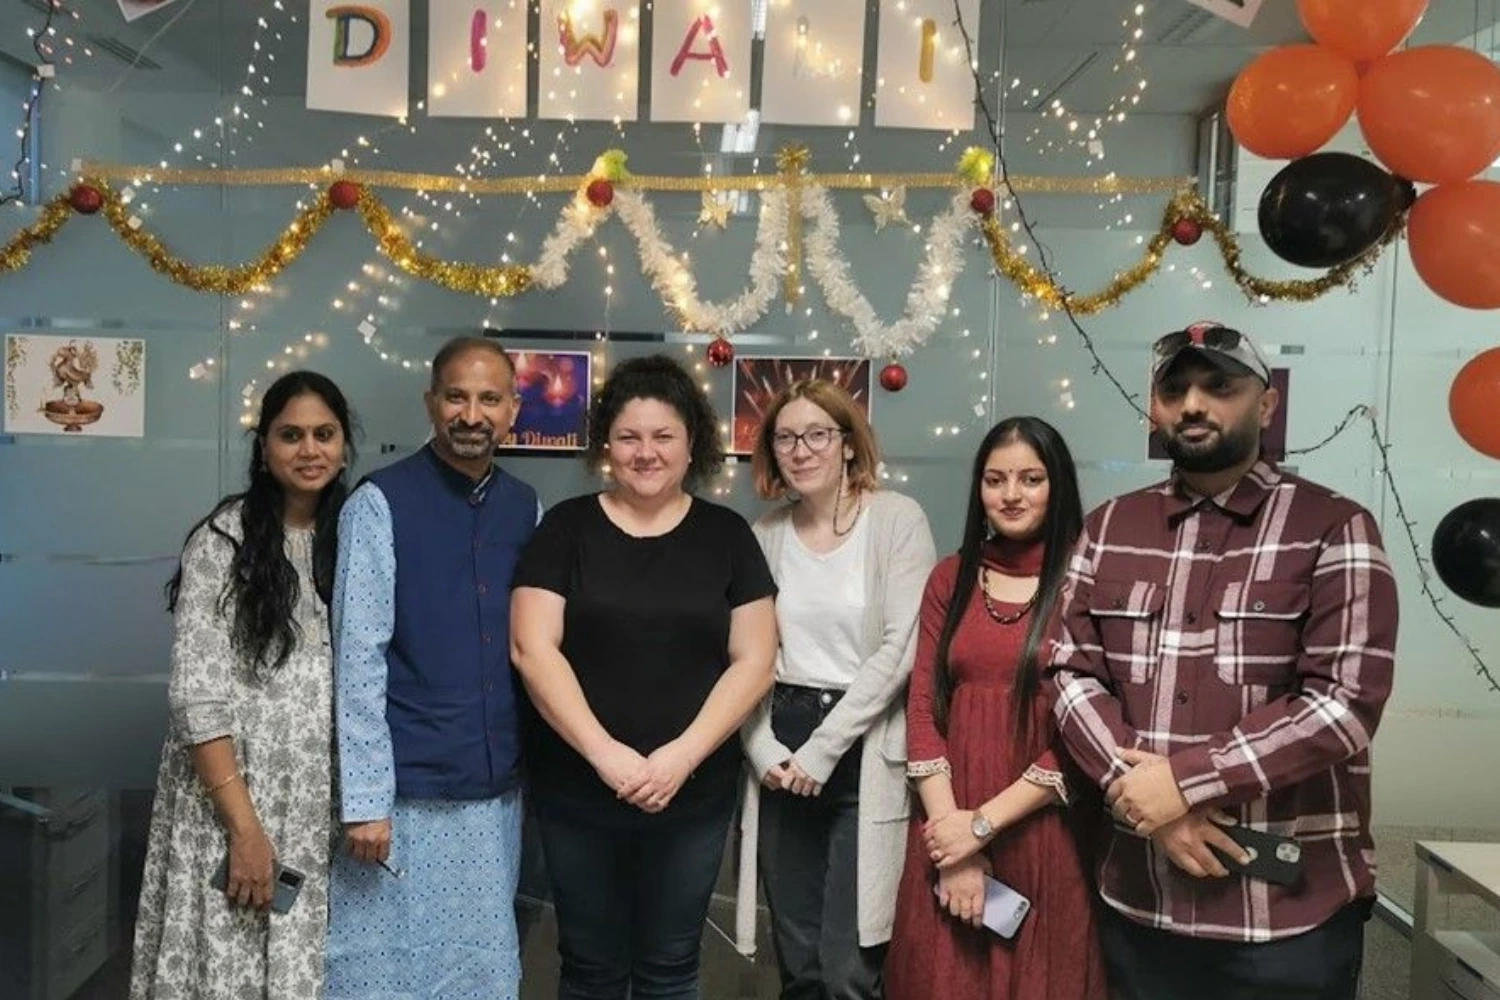 Celebrating Diwali and exchanging cultural experiences